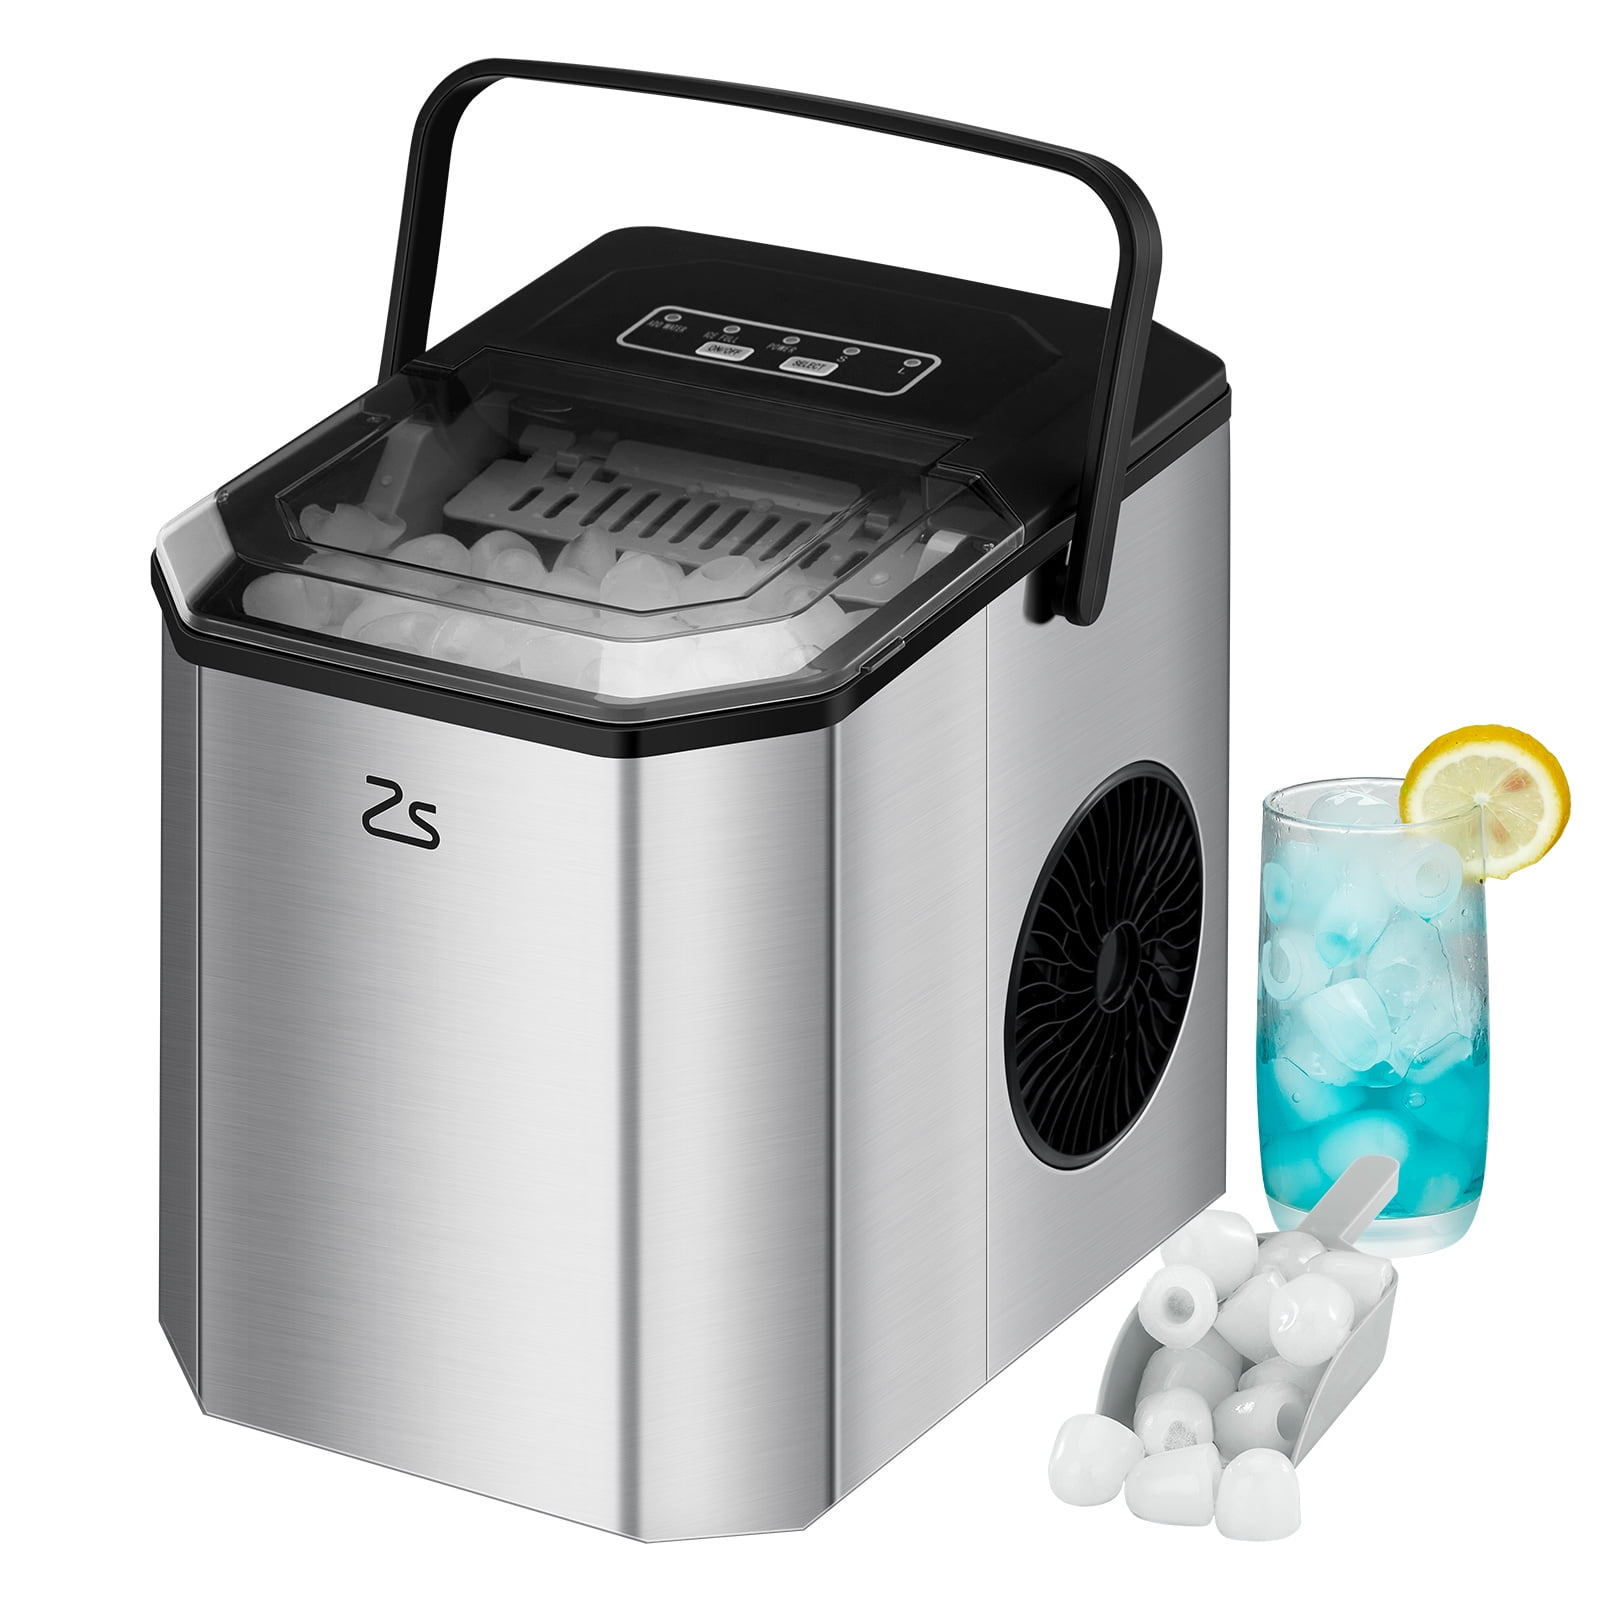  Nugget Ice Maker Countertop, Pebble Ice Maker Machine Pellet Sonic  Ice Maker Dispenser Portable for Home/Kitchen/Office, Soft Chewable Ice,  Making Ice in 6 Mins, 34Lbs/24H, Self-Cleaning, Ink Black : Appliances